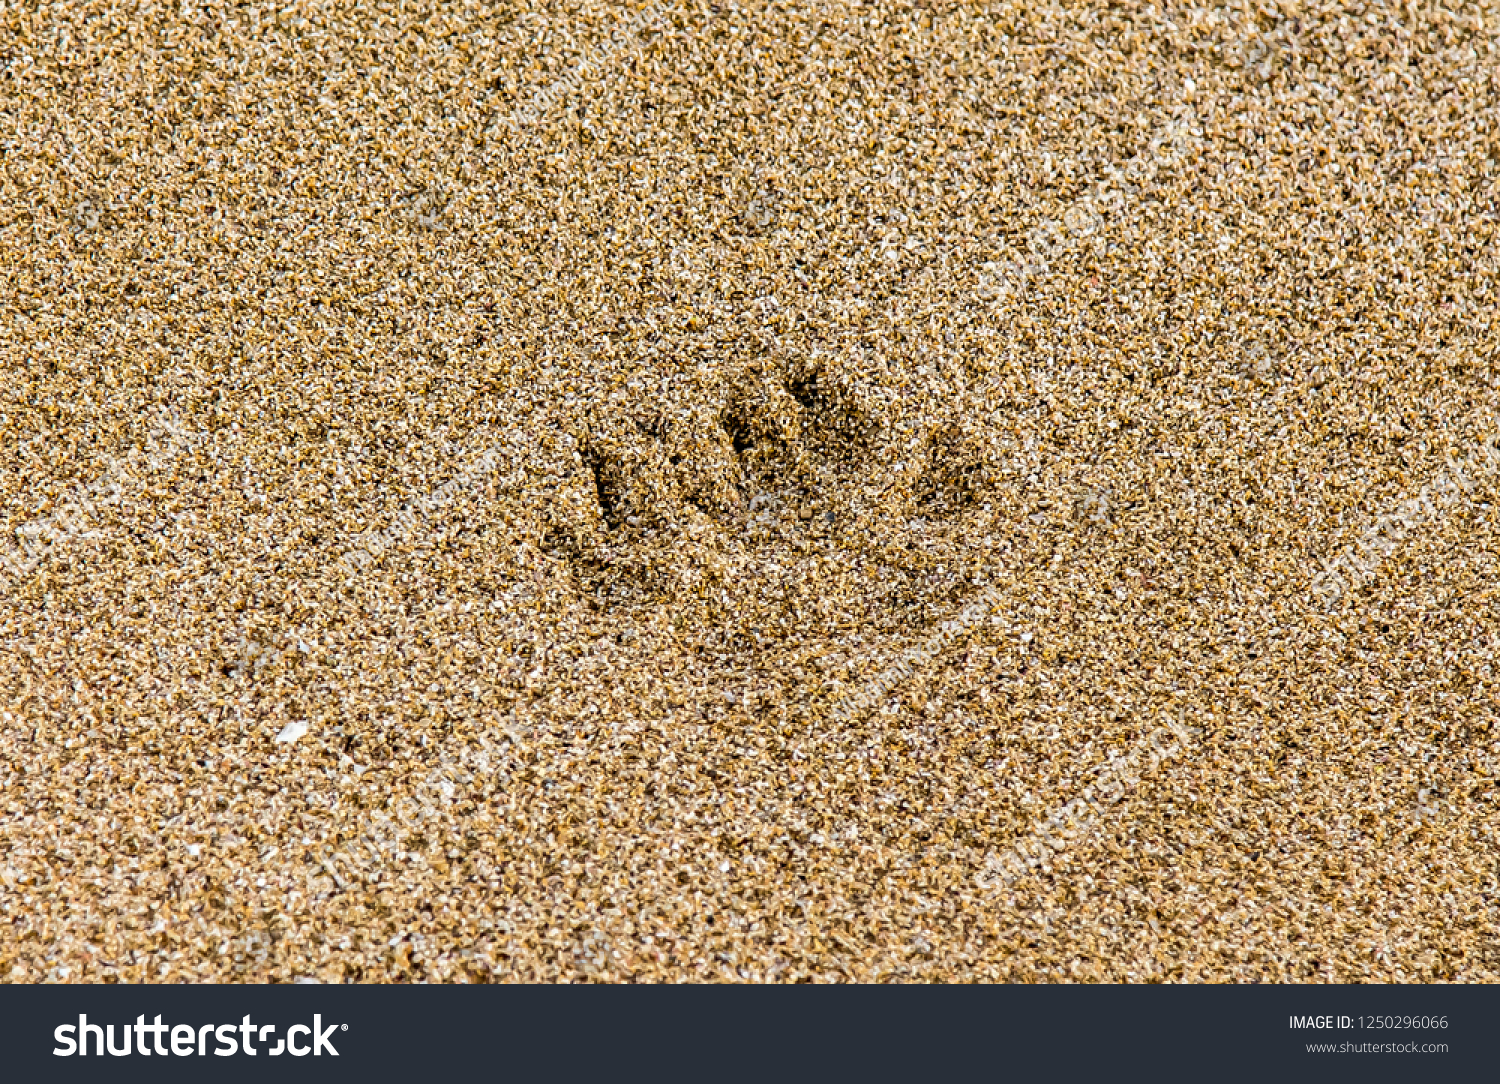 Animal footprints in the wet sand #1250296066